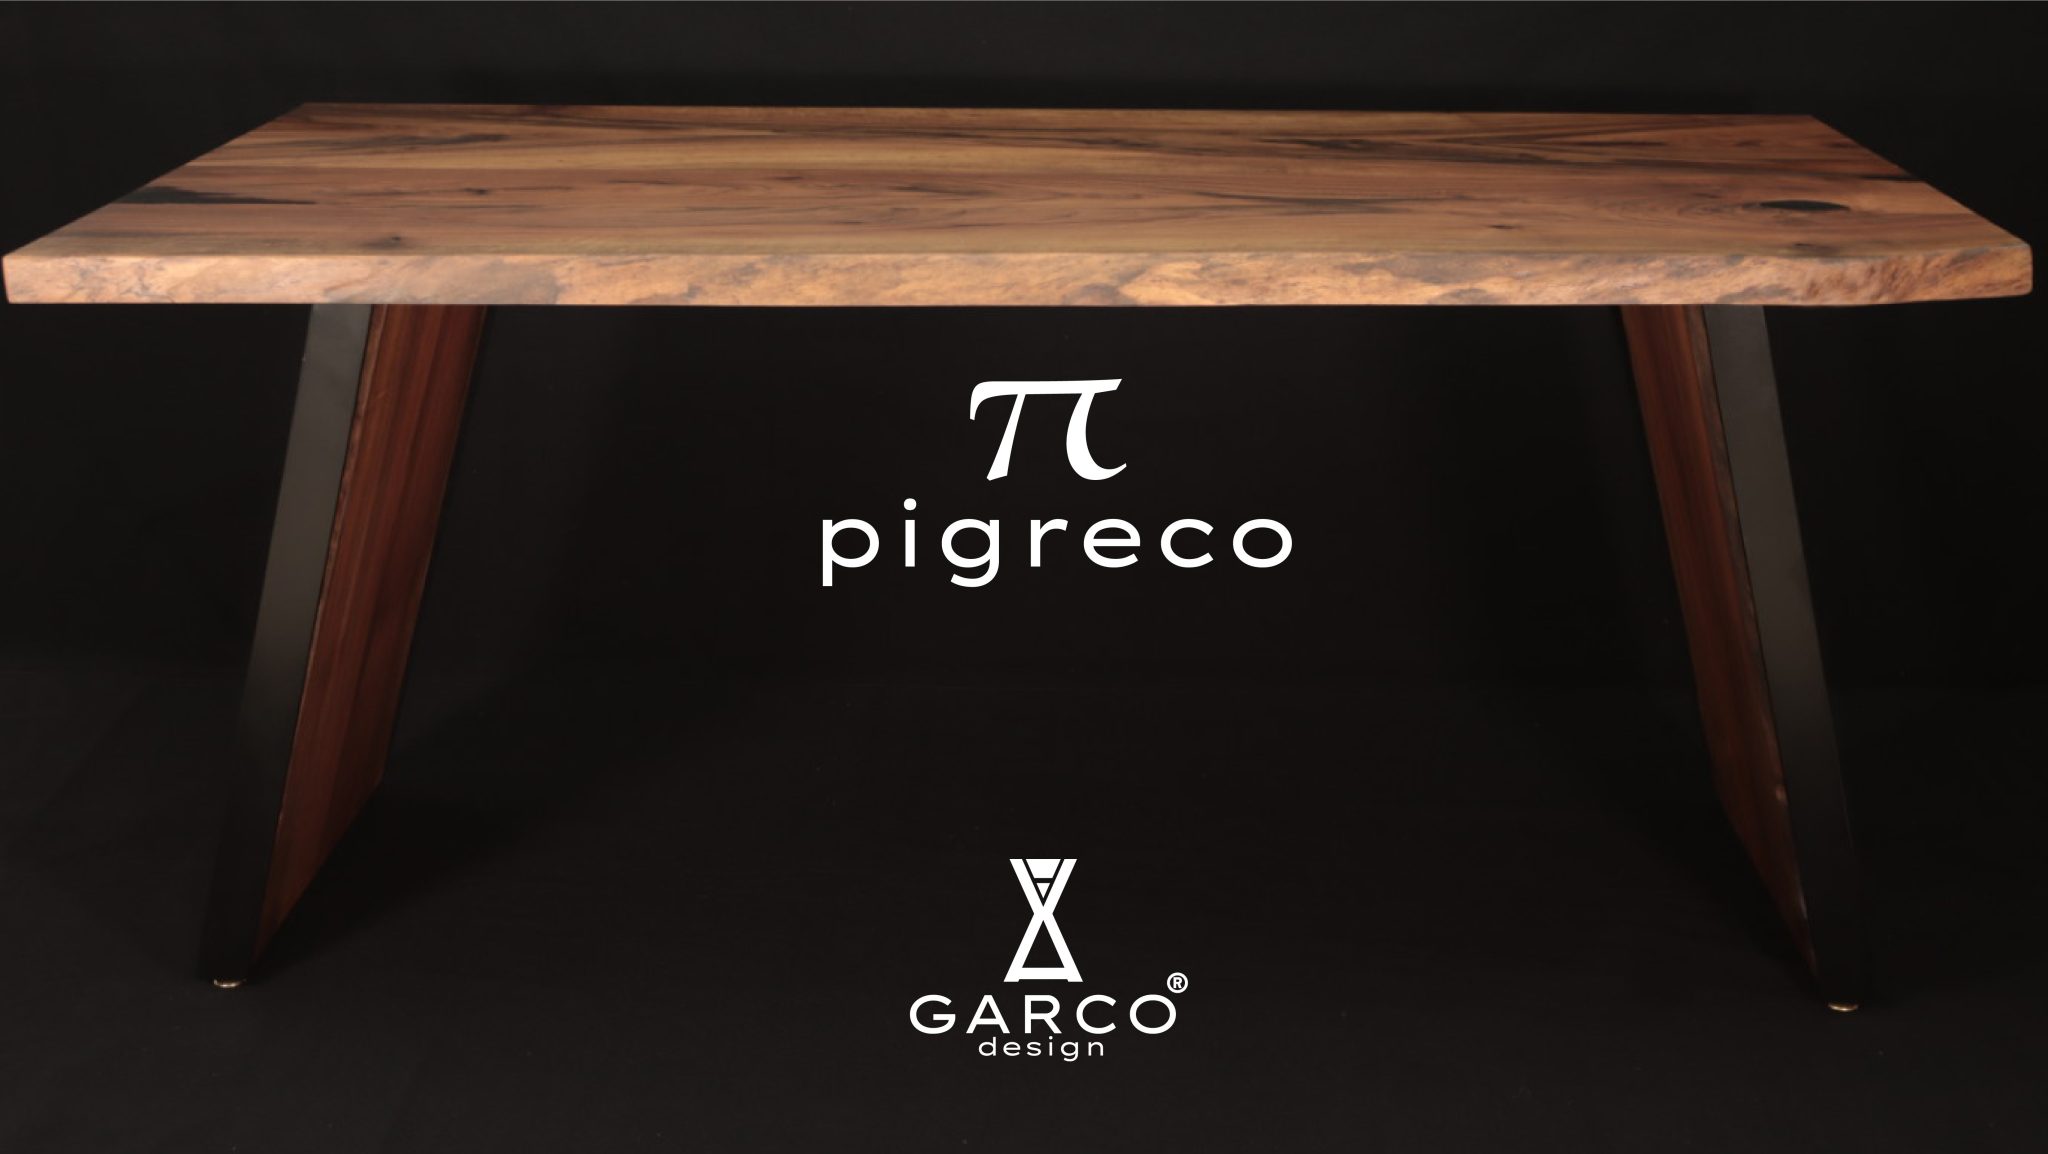 pigreco is a desk or a table handcrafted in Italy